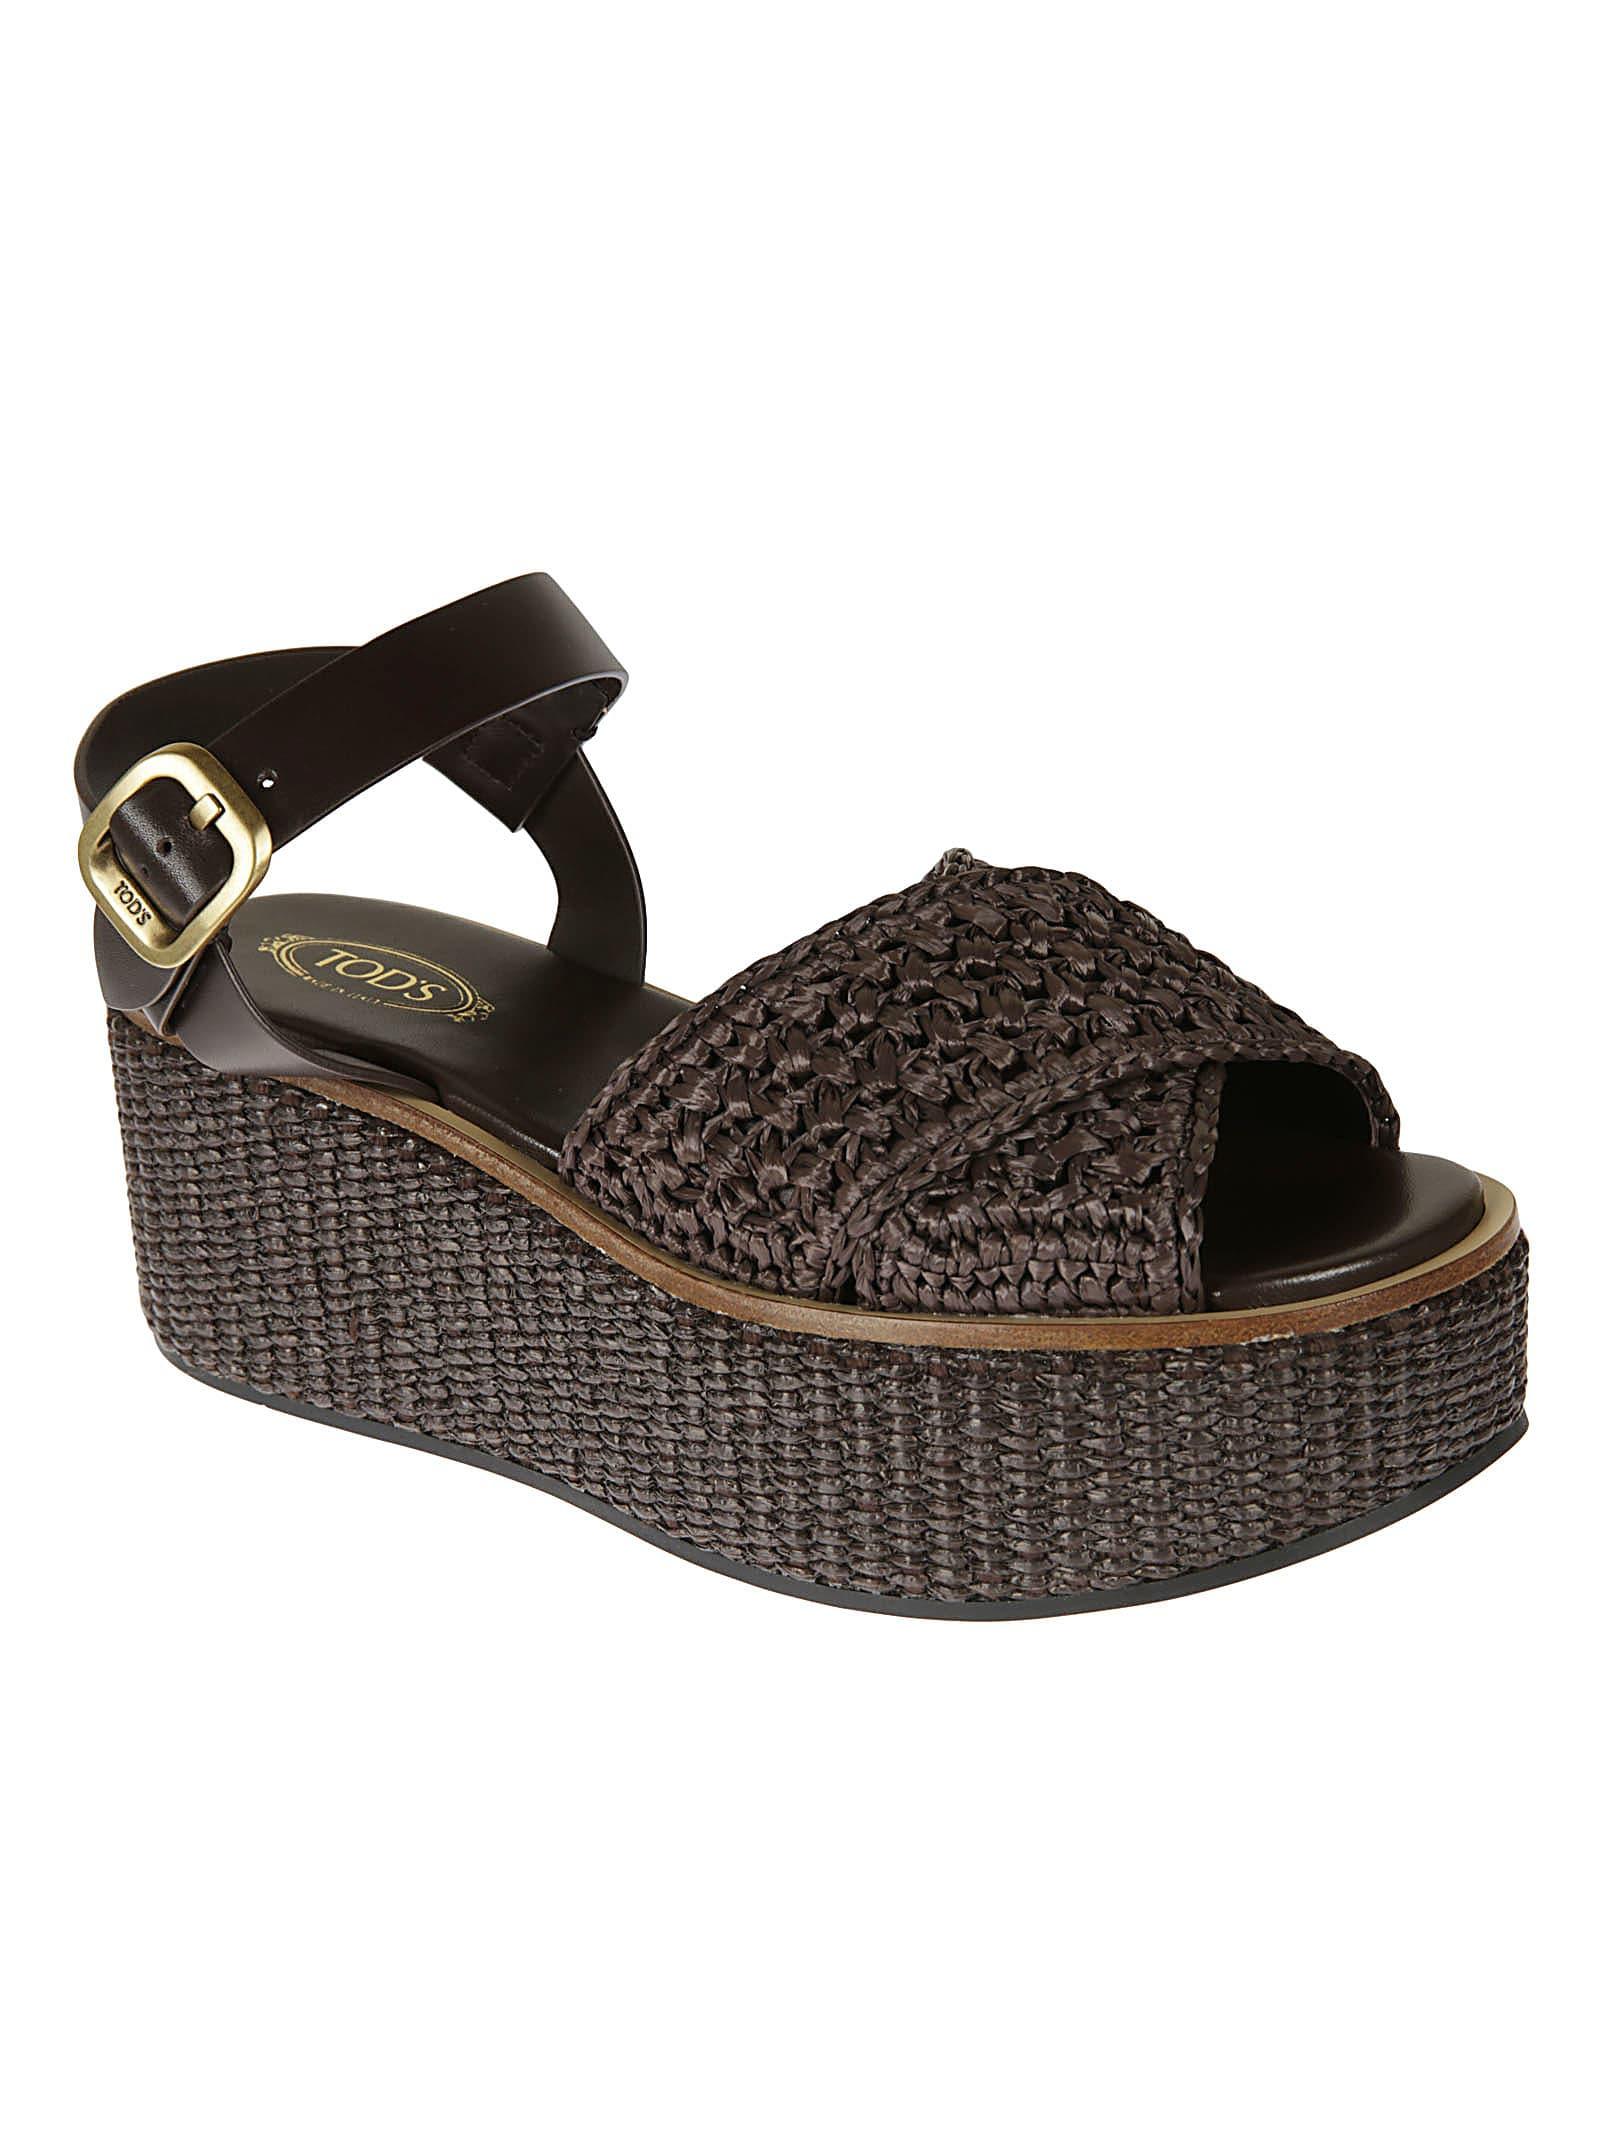 Tod's Kate leather sandals for Women - Black in KSA